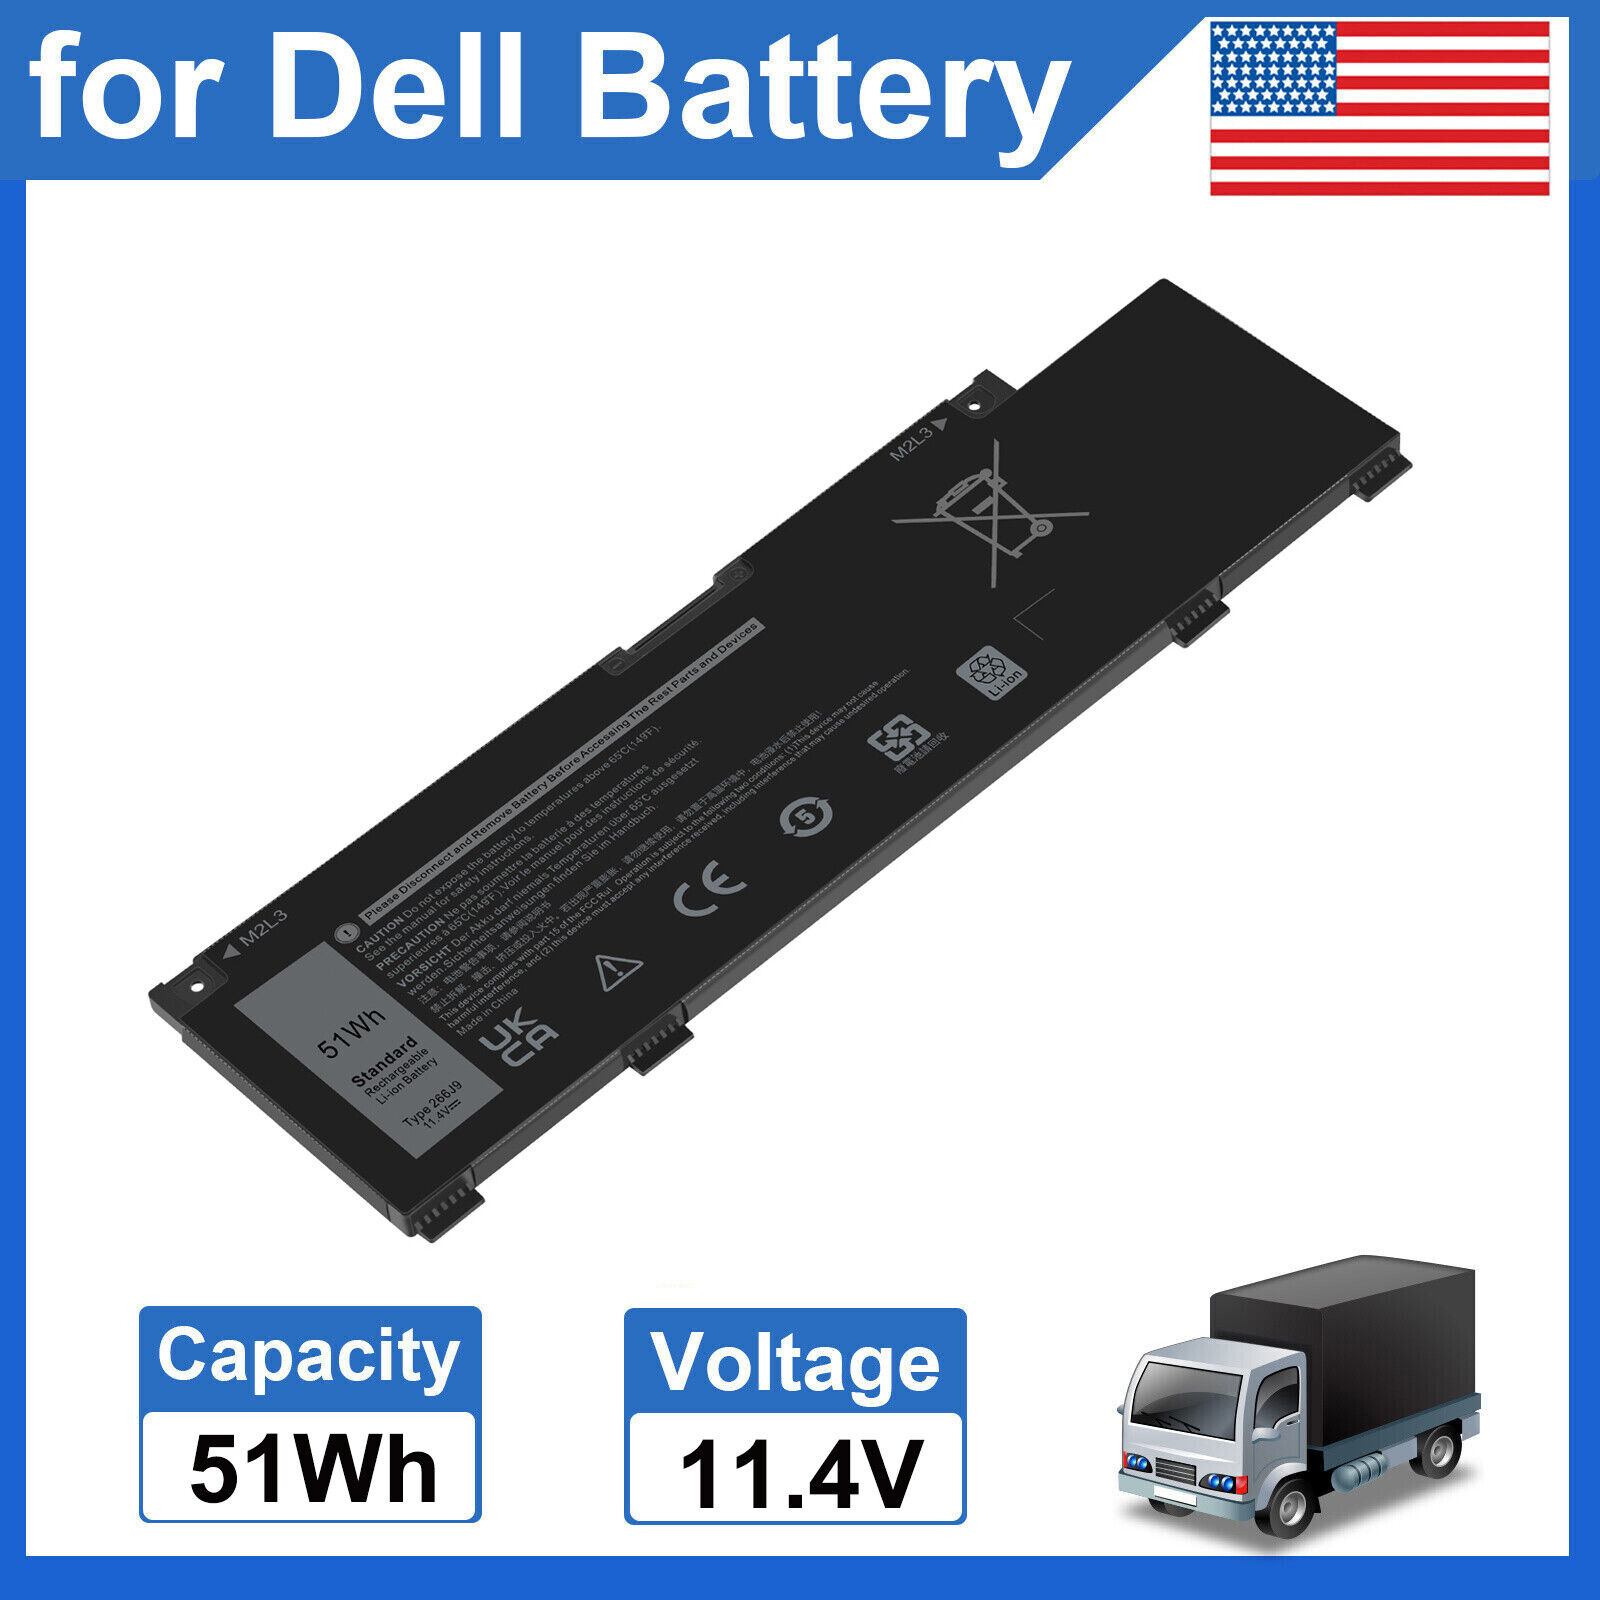 Battery 266J9 for Dell G3 15 3500 3590 G5 5500 5505 C9VNH 0415CG 0PN1VN 51Wh NEW